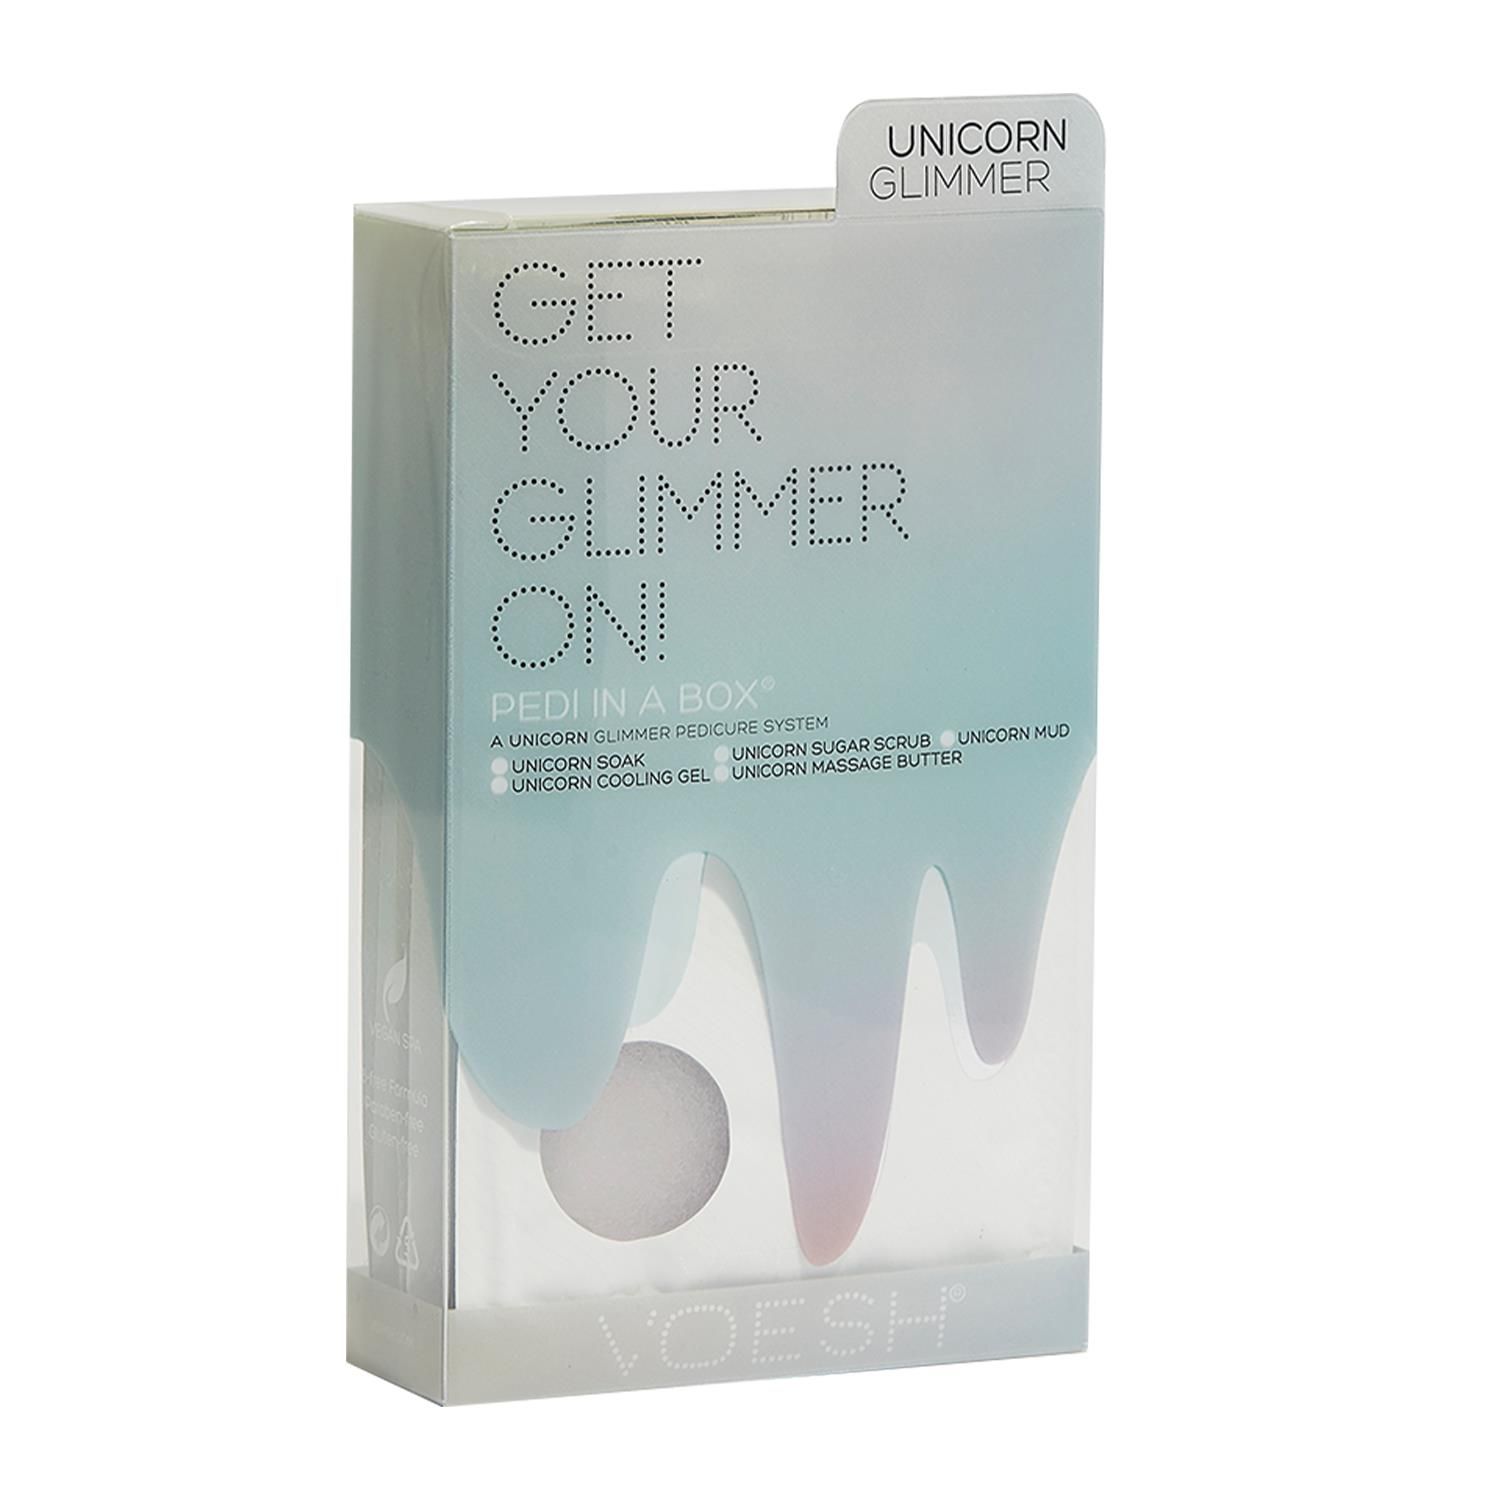 Voesh Get Your Glimmer On 5 Step Unicorn Glimmer Pedi In A Box Glimmer Spa.  Voesh glimmer Pedi in a box is the 5-step single-use pedicure experience. Definitely sparkly A pedicure with a whole lot of shimmers! For a party-ready skin that looks slimmer, brighter and refreshed.For a party-ready skin that looks slimmer, brighter and refreshed. Inspired by the magical mystical Unicorn, with hydrating and softening benefits of Peach. Set includes Unicorn Soak, Unicorn Sugar Scrub, Unicorn Mud, Unicorn Cooling Gel and Unicorn Massage Butter.  Made With Vanilla Bean Extract. 

The Perfect Pedi For:
DIY At-Home Pedicure
Date Night
Bachelorette Parties
Girls’ Night In

This kit contains:
Sea Salt Soak 35g: This soak helps relieve tension, stiffness, minor aches and discomfort in your feet. It helps detox and deodorize the feet.
Sugar Scrub 35g: The scrub gently exfoliates dead skin cells and helps soften your feet. Perfect for use on the soles on your feet.
Mud Masque 35g: The masque removes deep-seated impurities in your skin leaving your feet feeling clean and revived.
Cooling Gel Mask 35g: This gel-based mask helps cool and soothe your feet. It is packed with gold shimmer for a touch of luxury.
Massage Cream 35g: The massage cream hydrates and soothes skin. It softens the soles of your feet and helps prevent dryness and roughness.